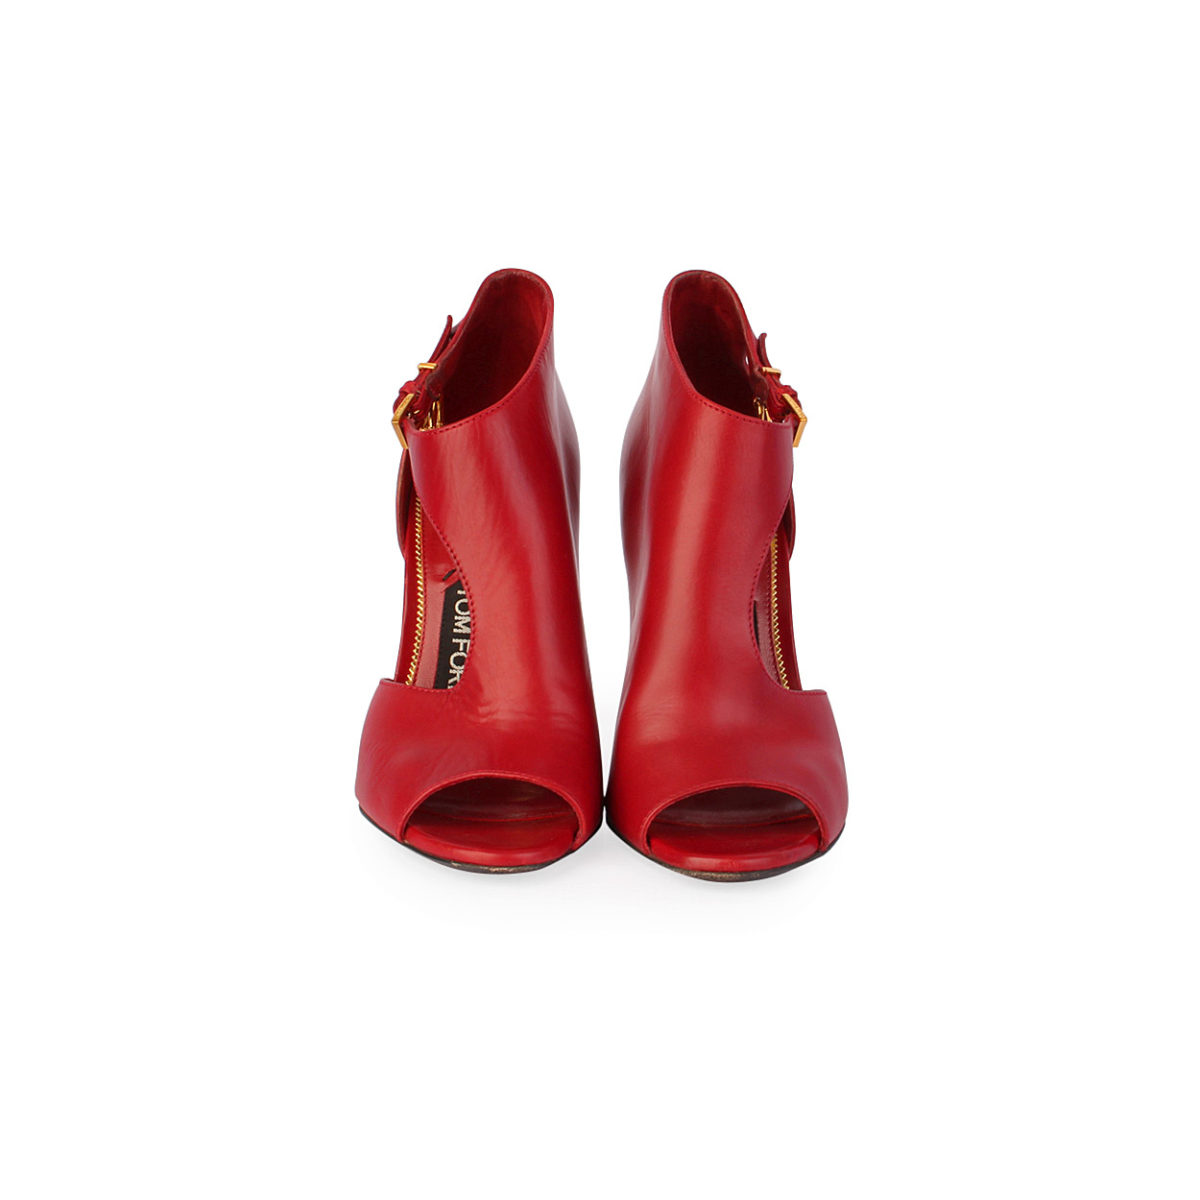 TOM FORD Women's Peep Toe Cut-out Stiletto Booties Red - S: 36 (3.5 ...